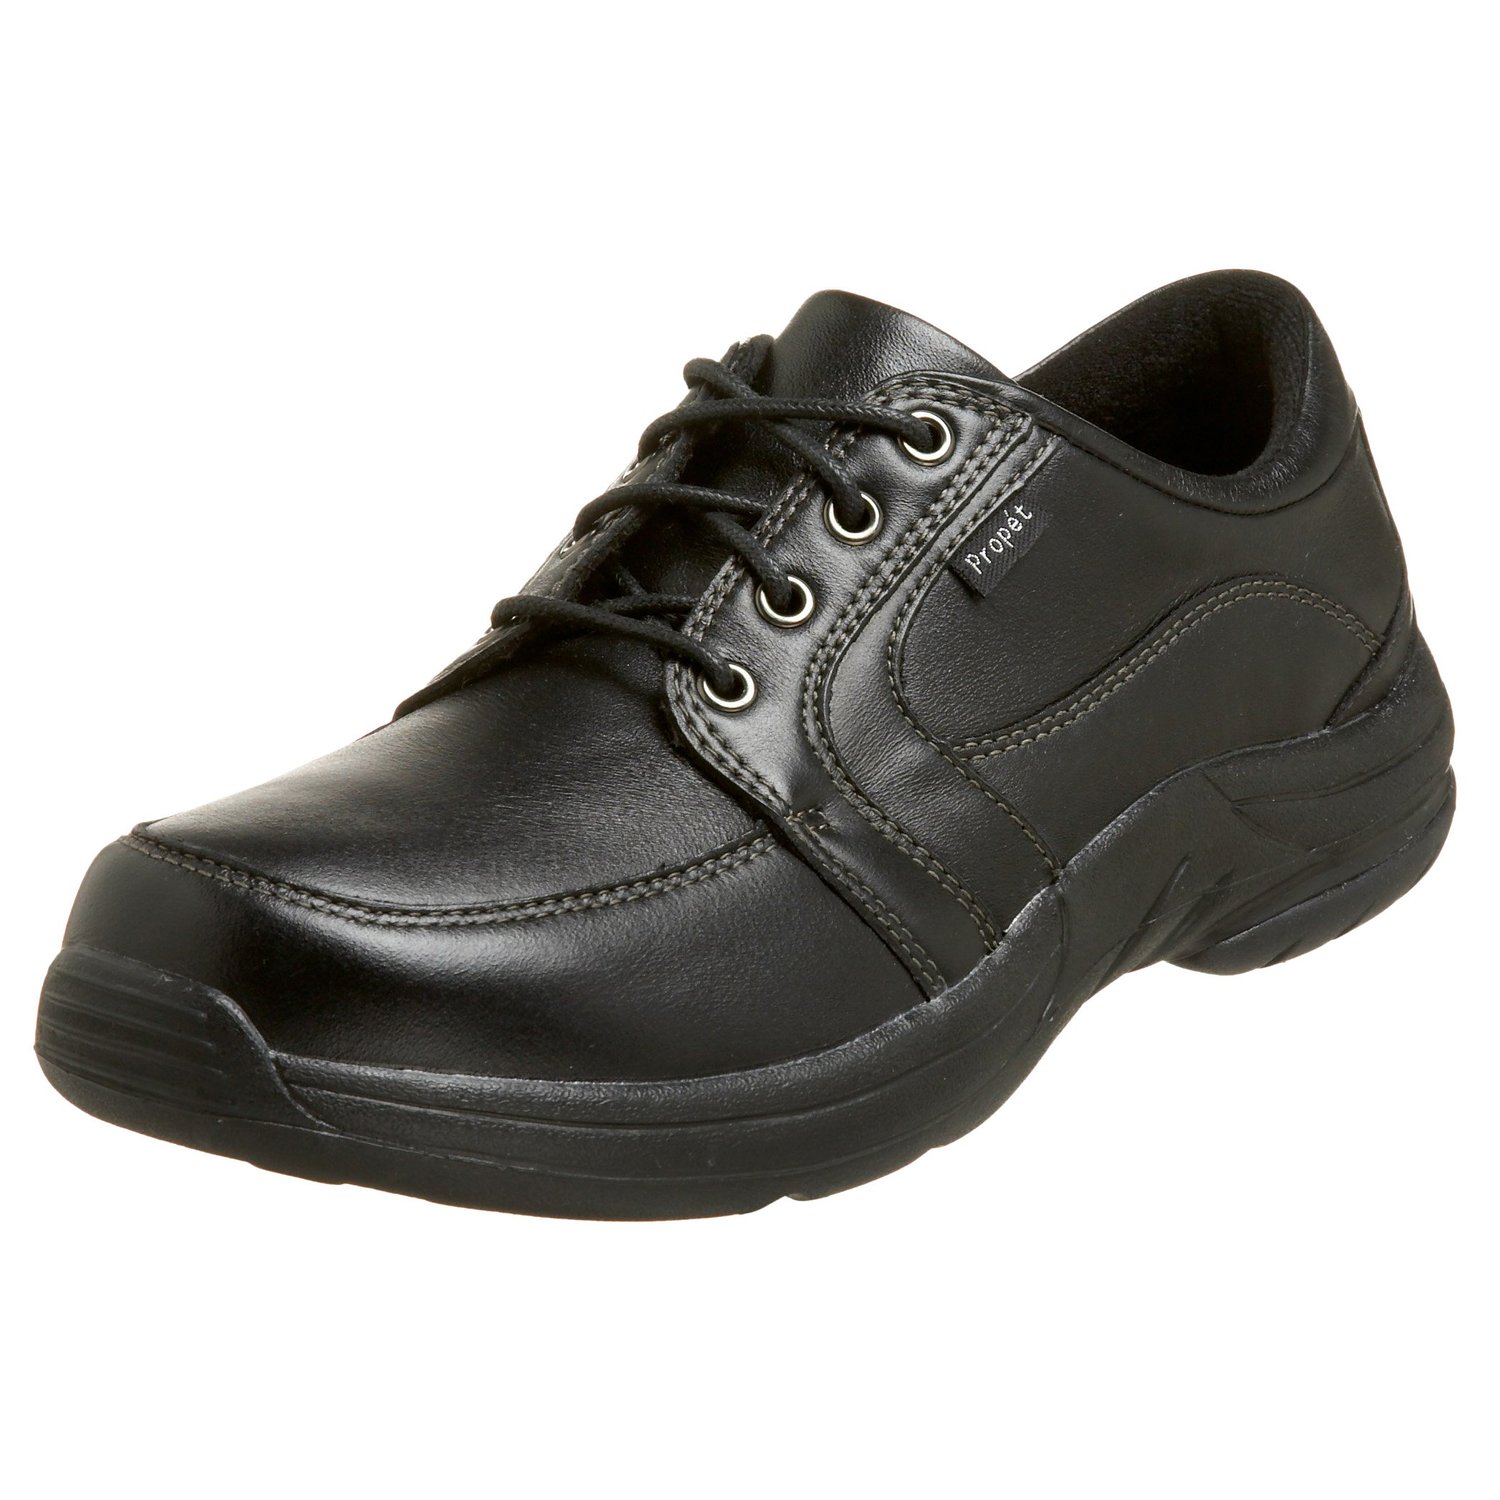 Top 5 Walking Shoes for Overweight Men